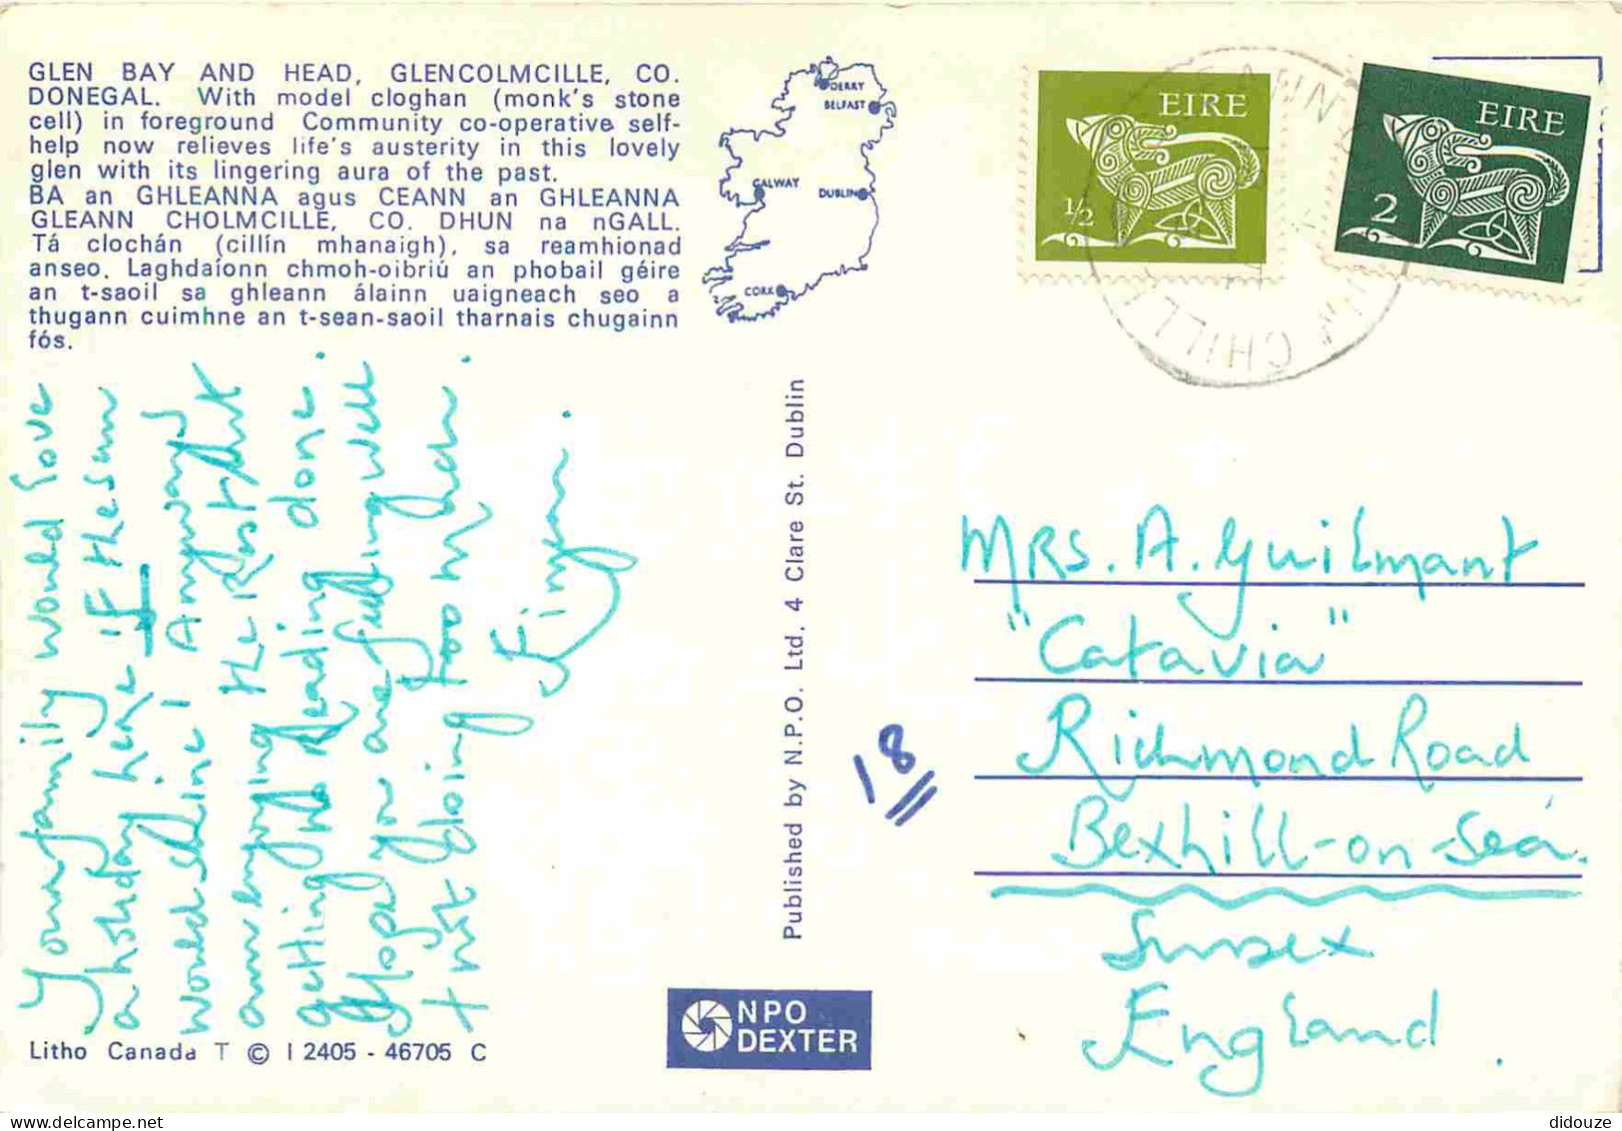 Irlande - Donegal - Glencolmcille - Glen Bay And Head - CPM - Voir Scans Recto-Verso - Donegal